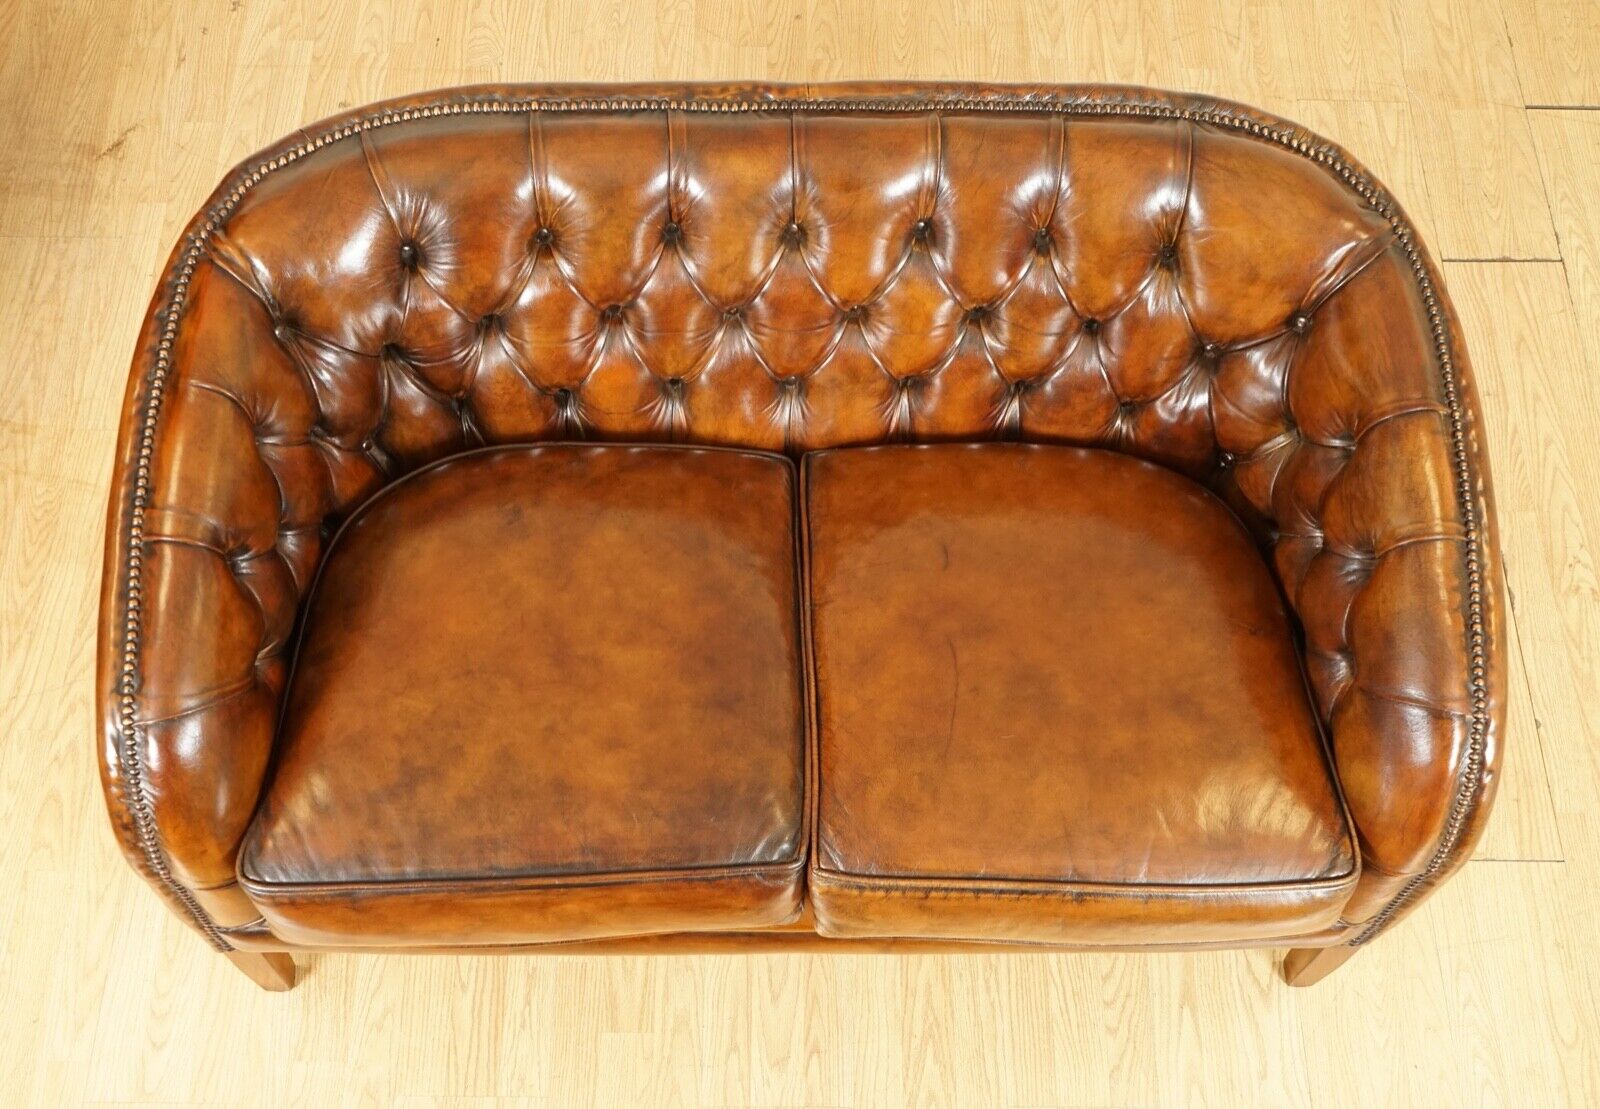 STUNNING FULLY RESTORED HAND DYED WHISKEY BROWN LEATHER TWO SEATER SOFA (1/2)